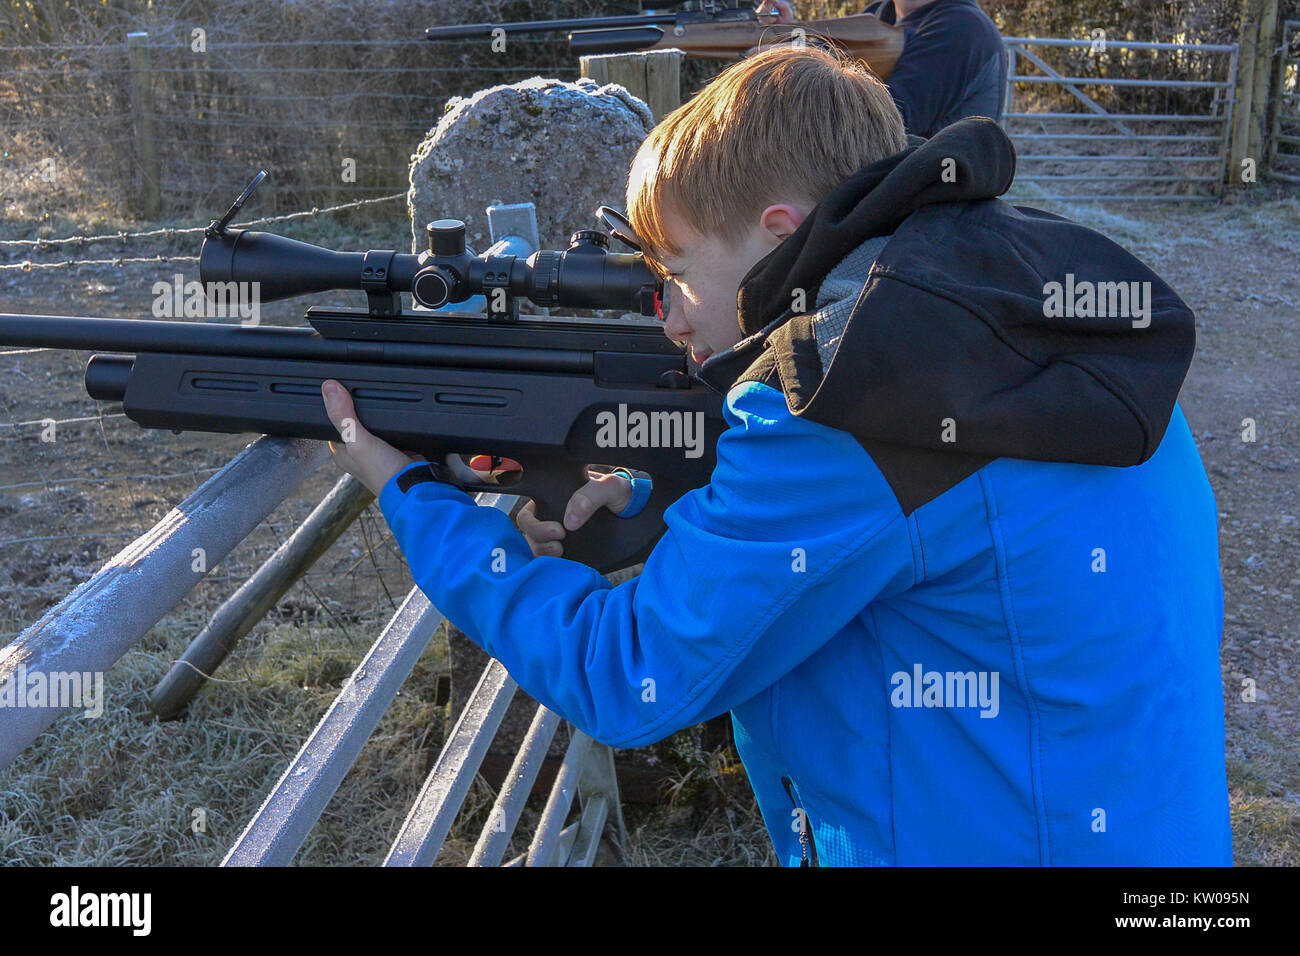 Teenage boy firing an air rifle in the countryside on a cold, frosty day Stock Photo